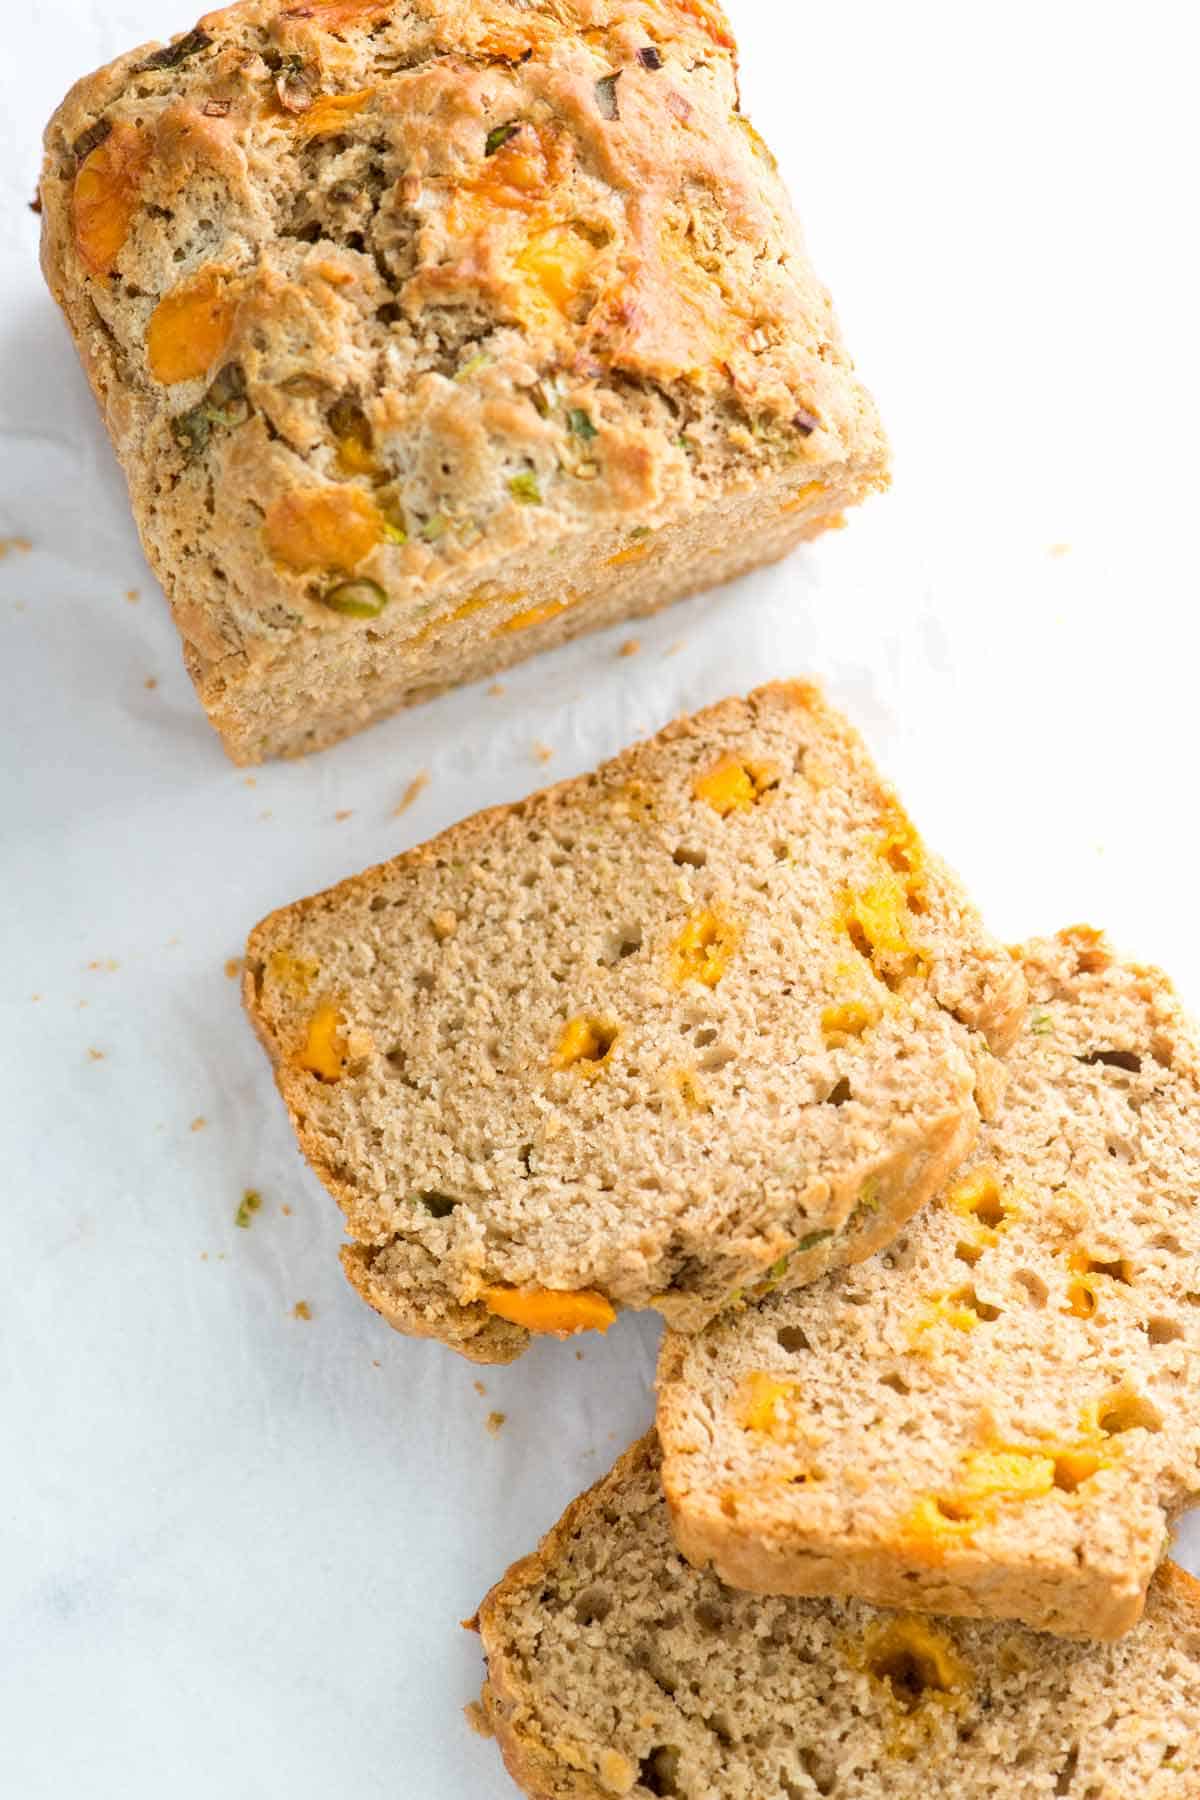 Stout Beer Bread made with Cheddar Cheese